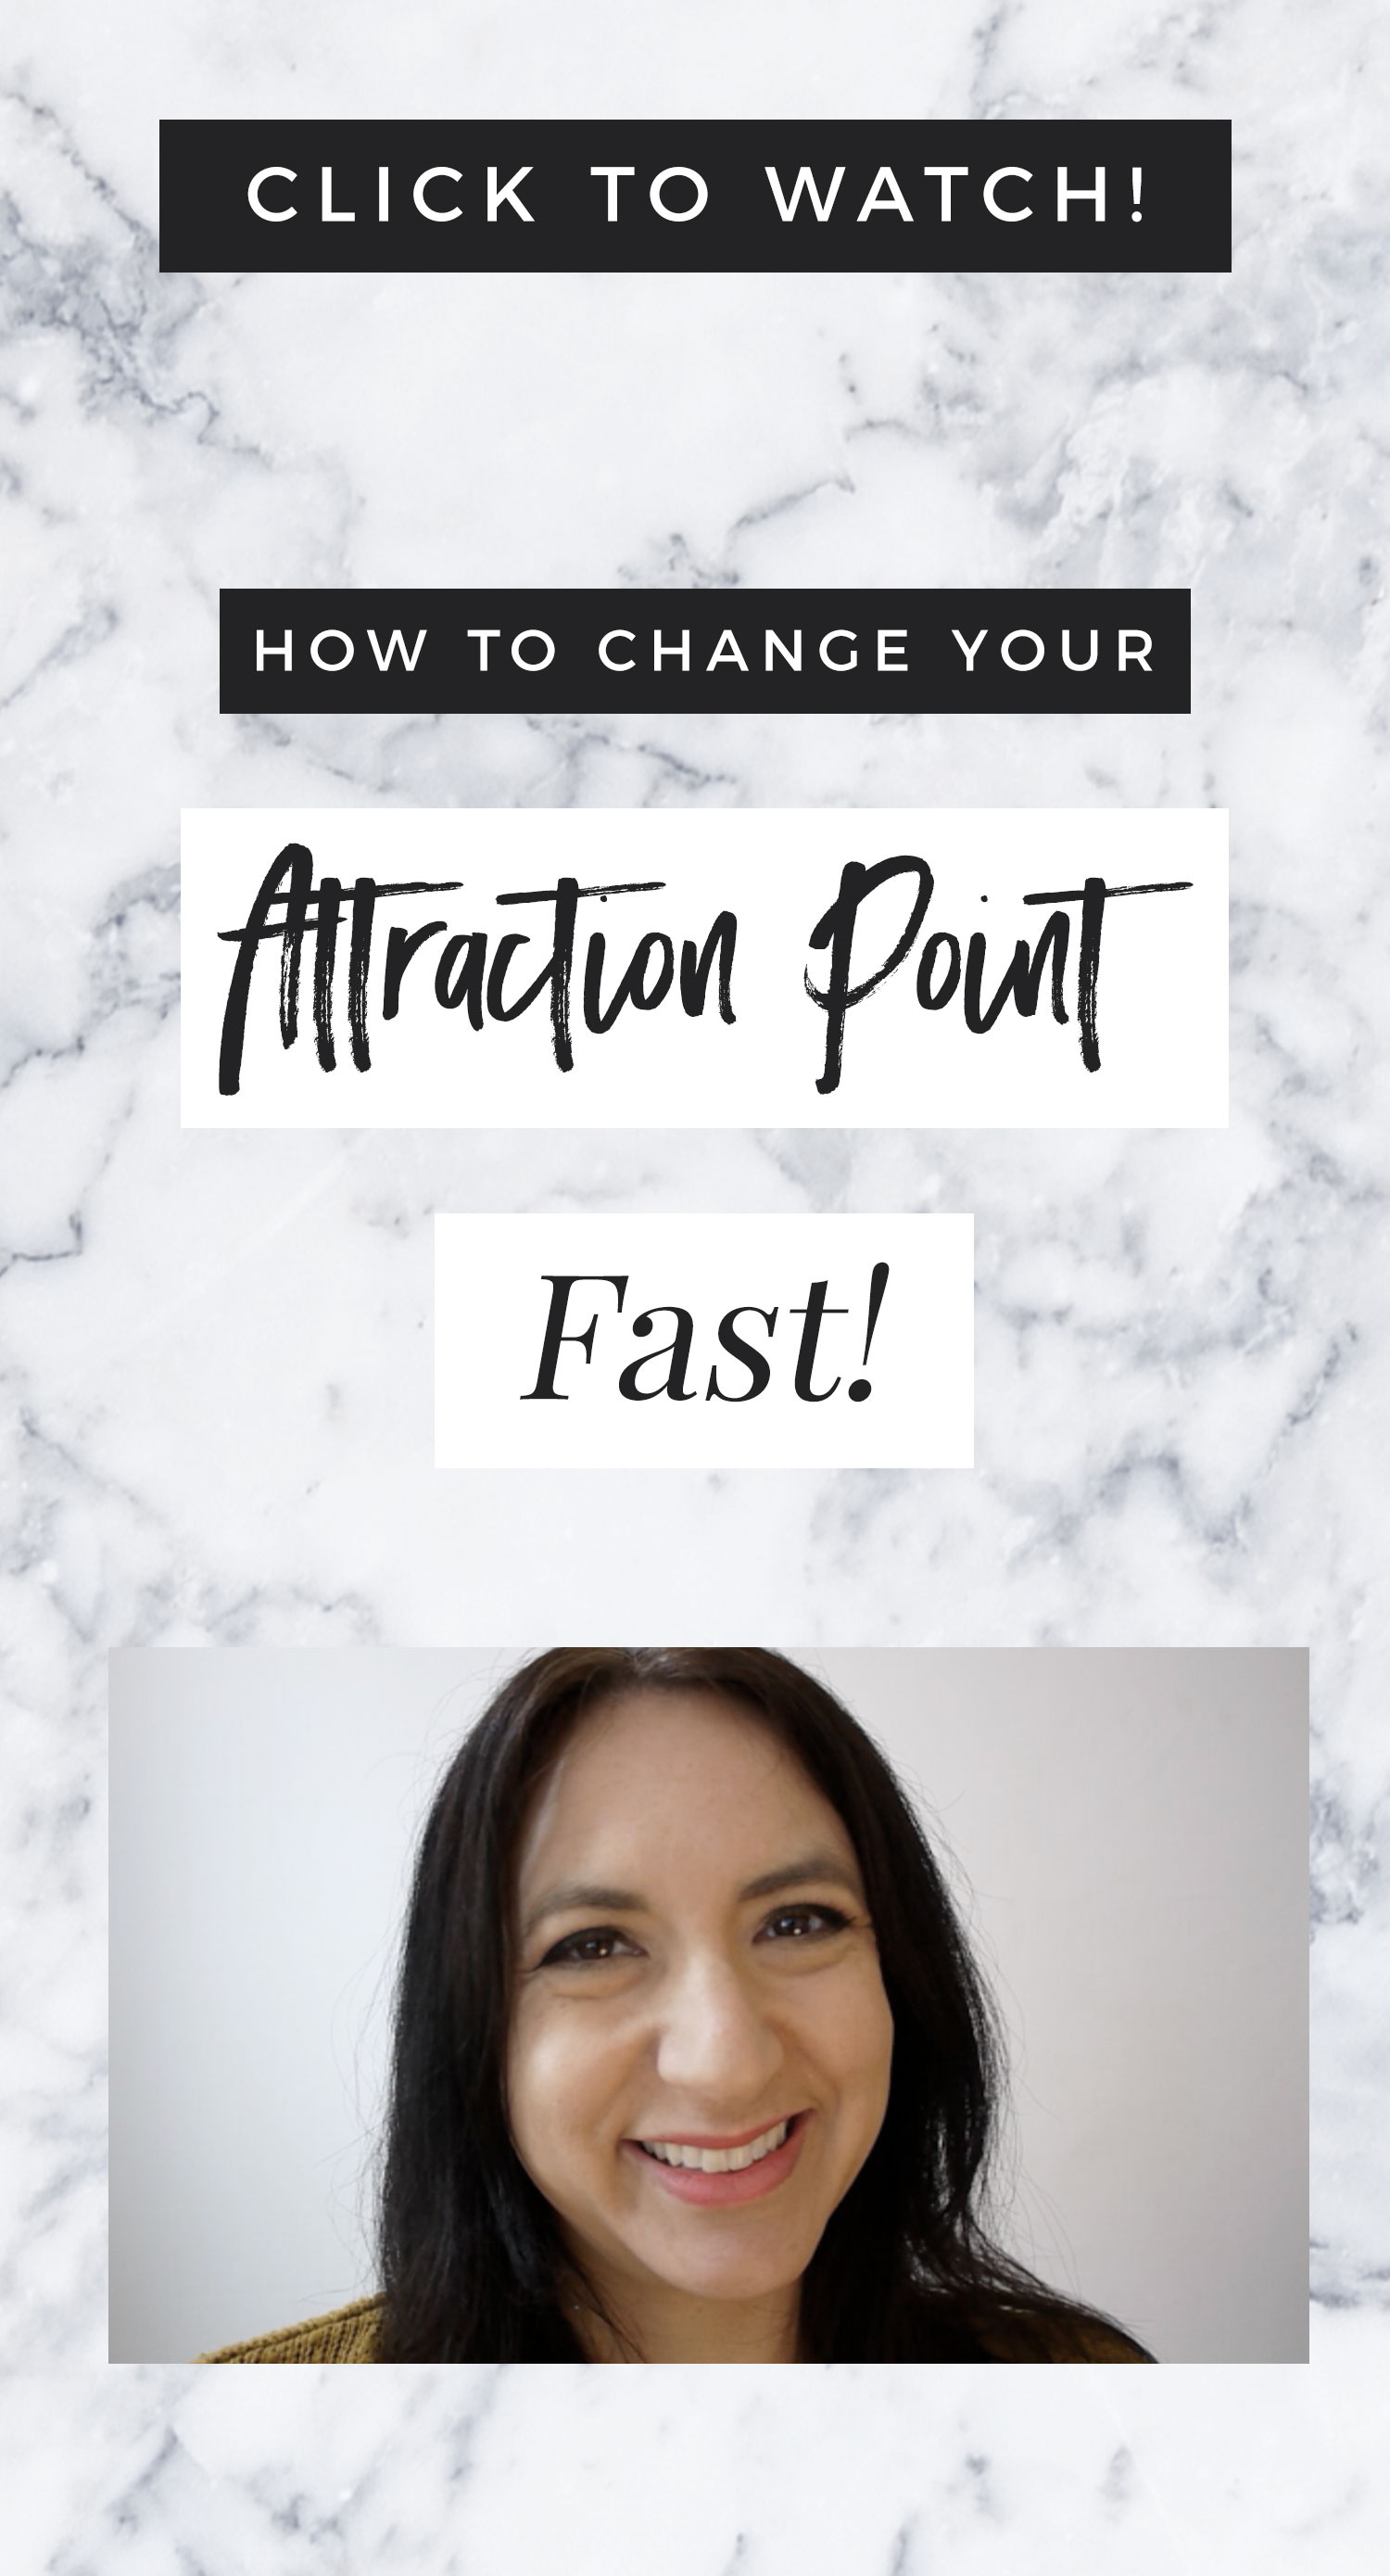 How To Change Your Attraction Point - FAST!